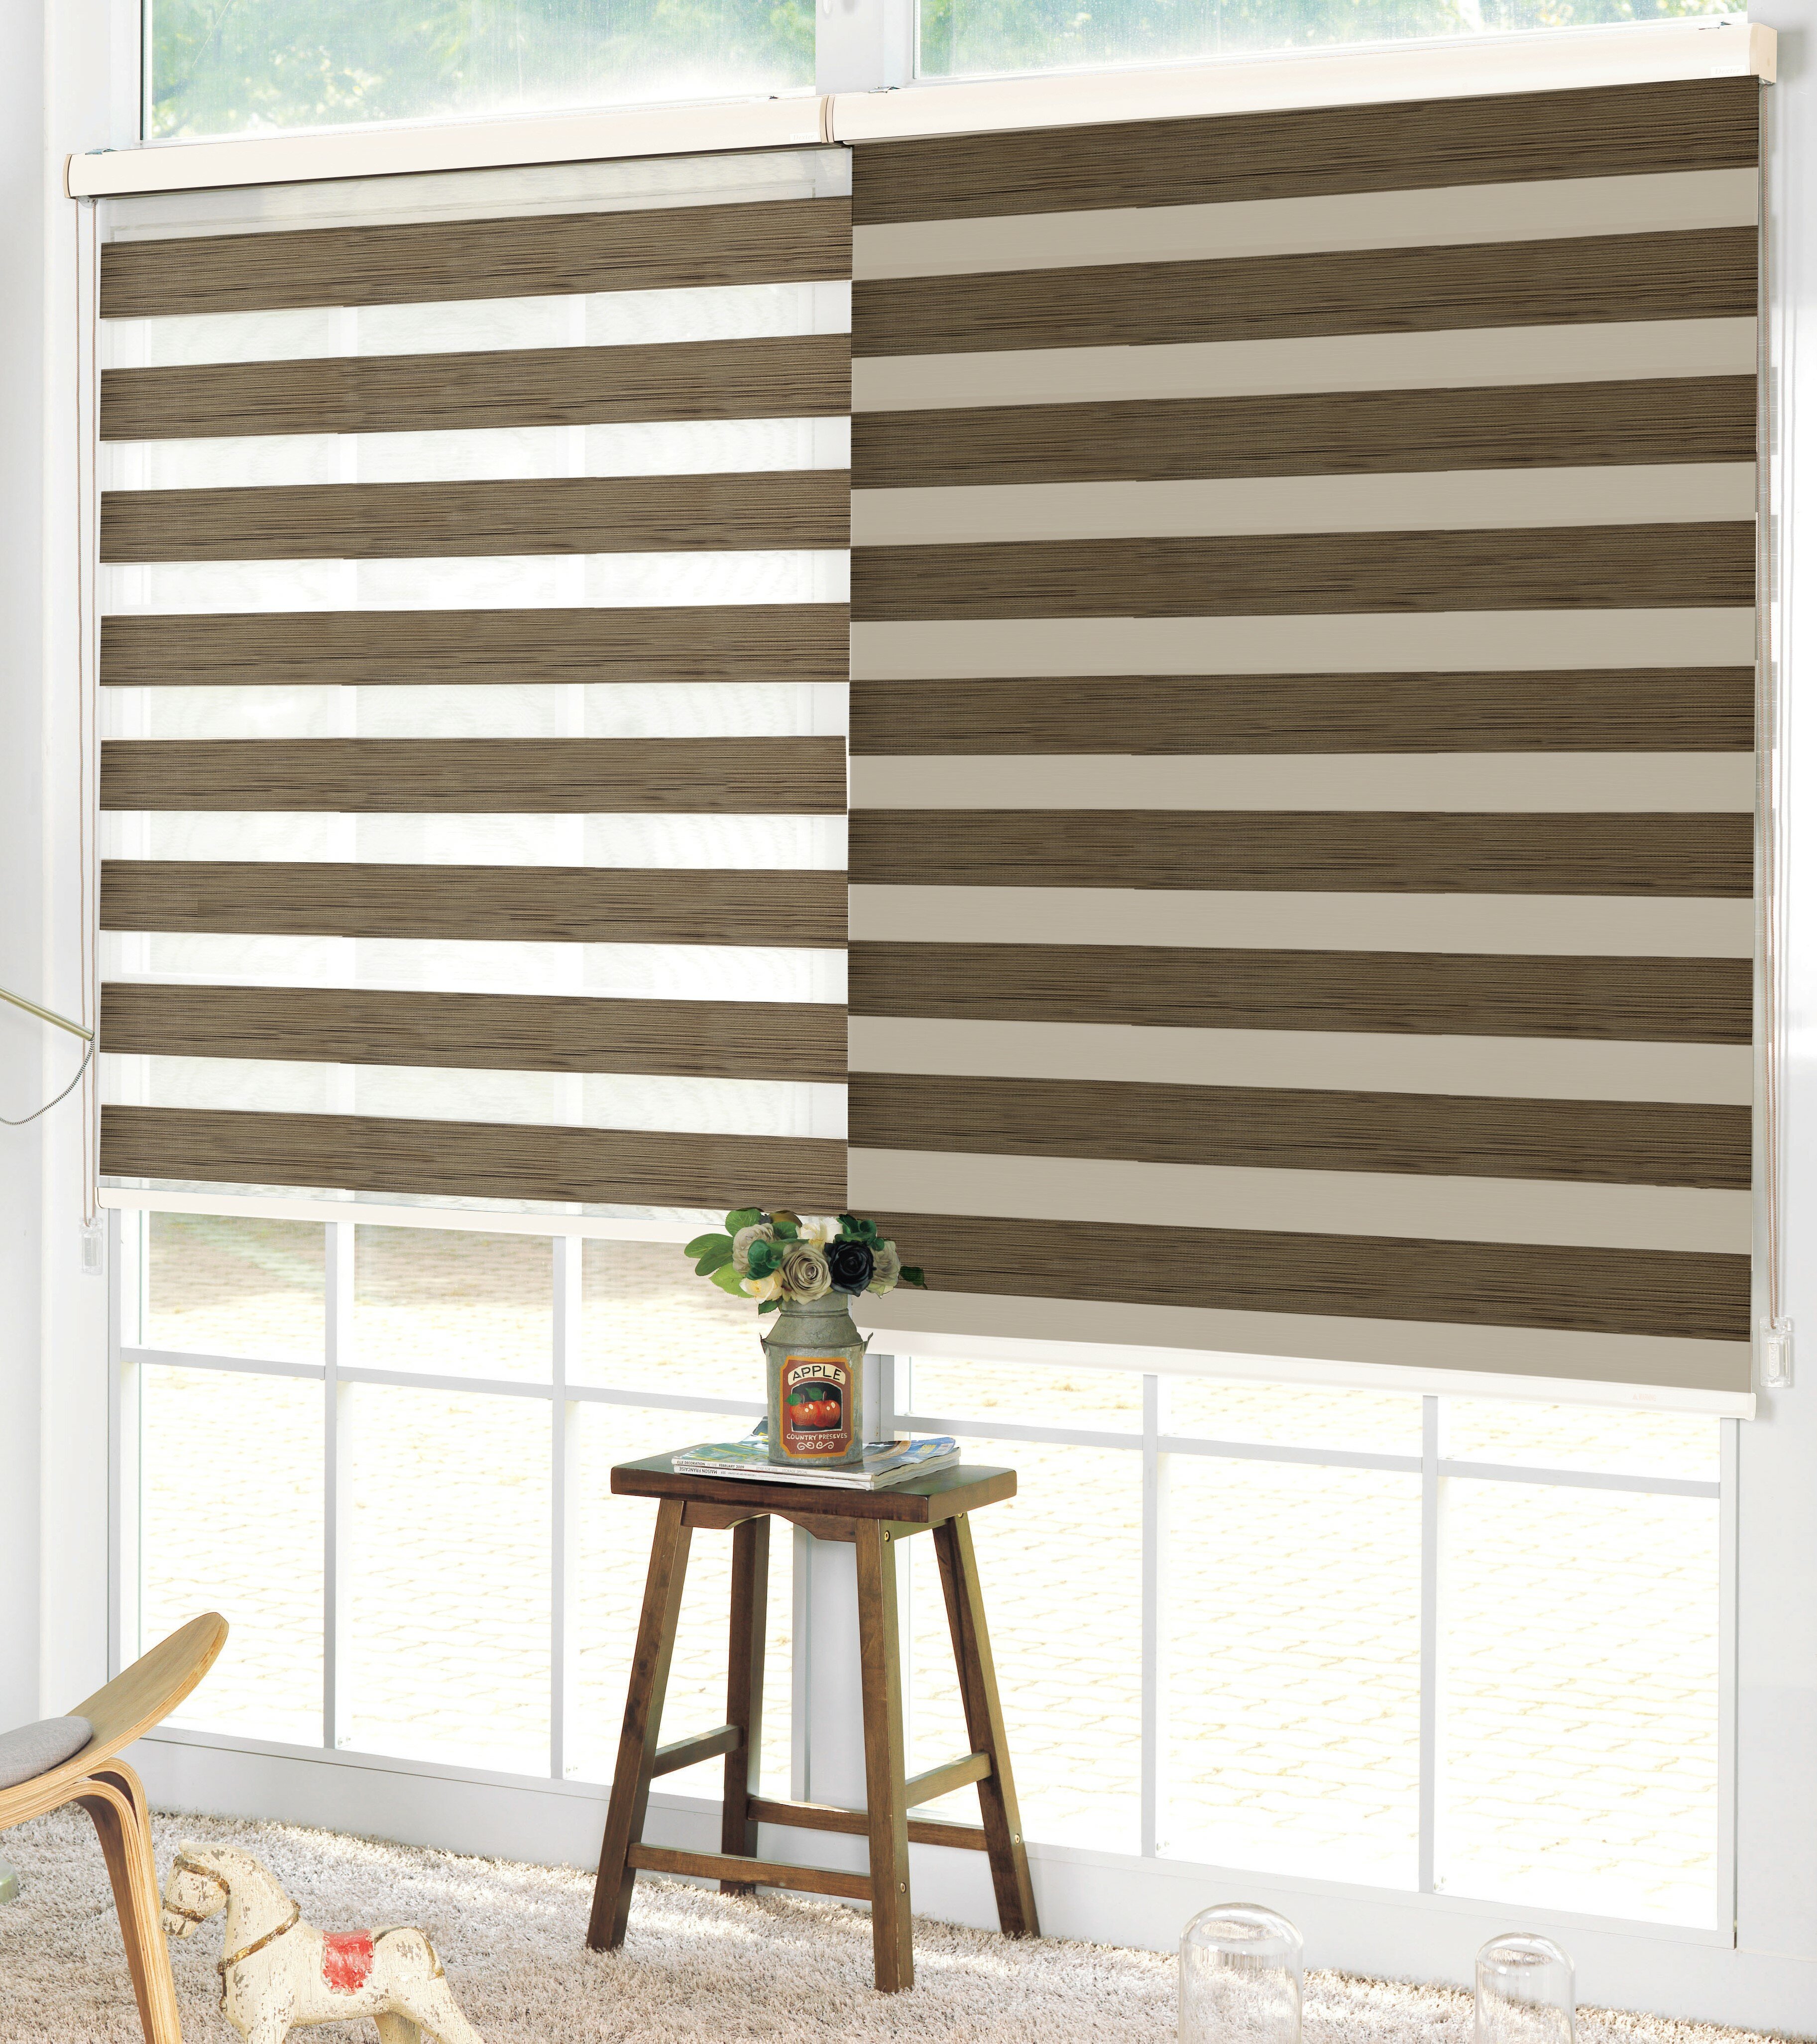 Wayfair Fabric Roll Out Blinds For Indoor Sunroom